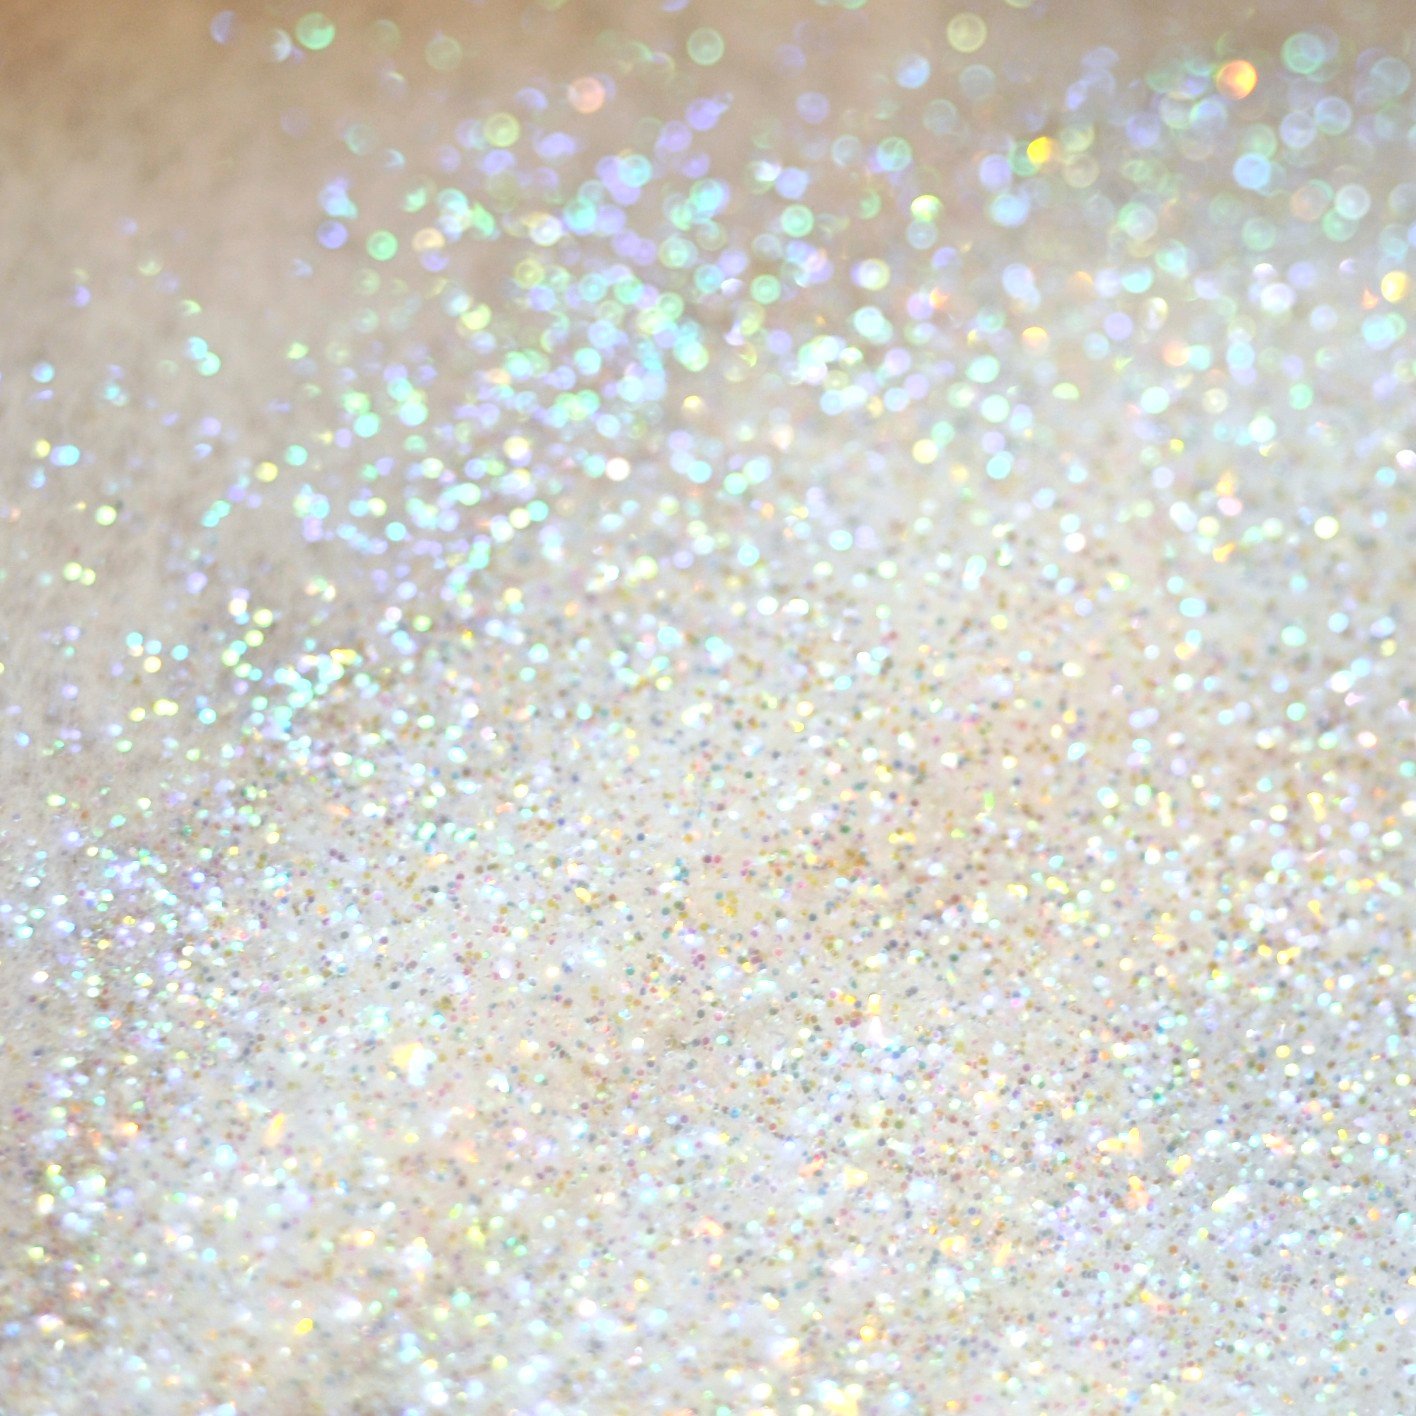  glitter background viewing 18 images for clear glitter background